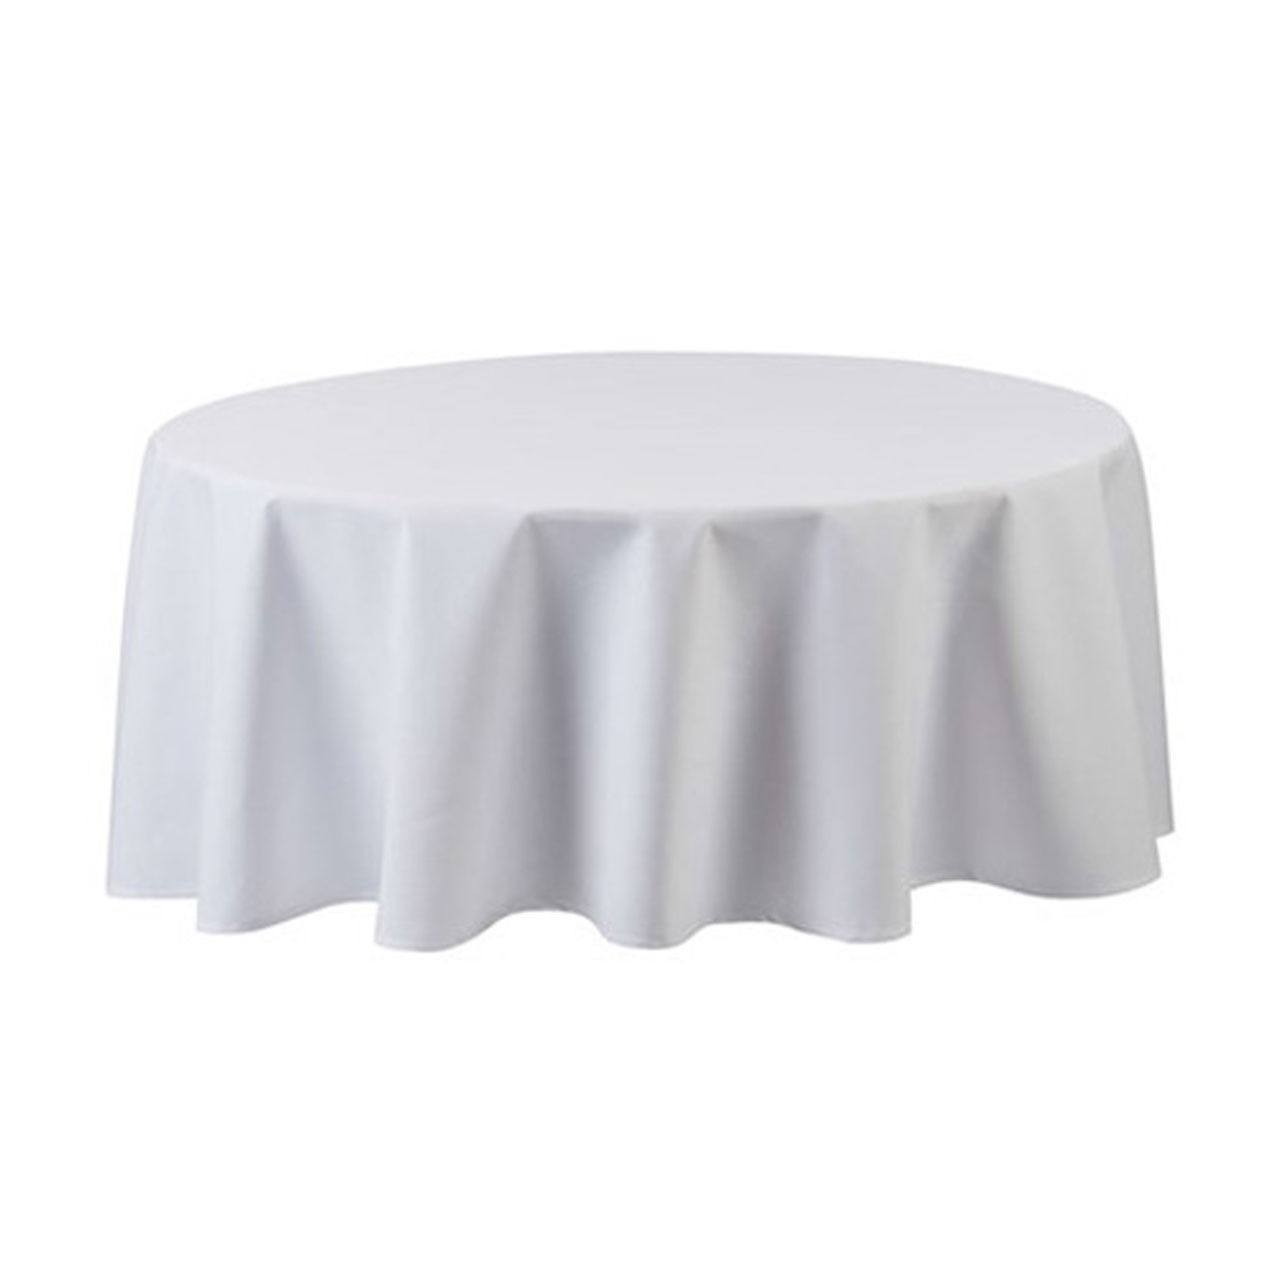 From which location is the Seamless White 90" Round Tablecloth shipped?